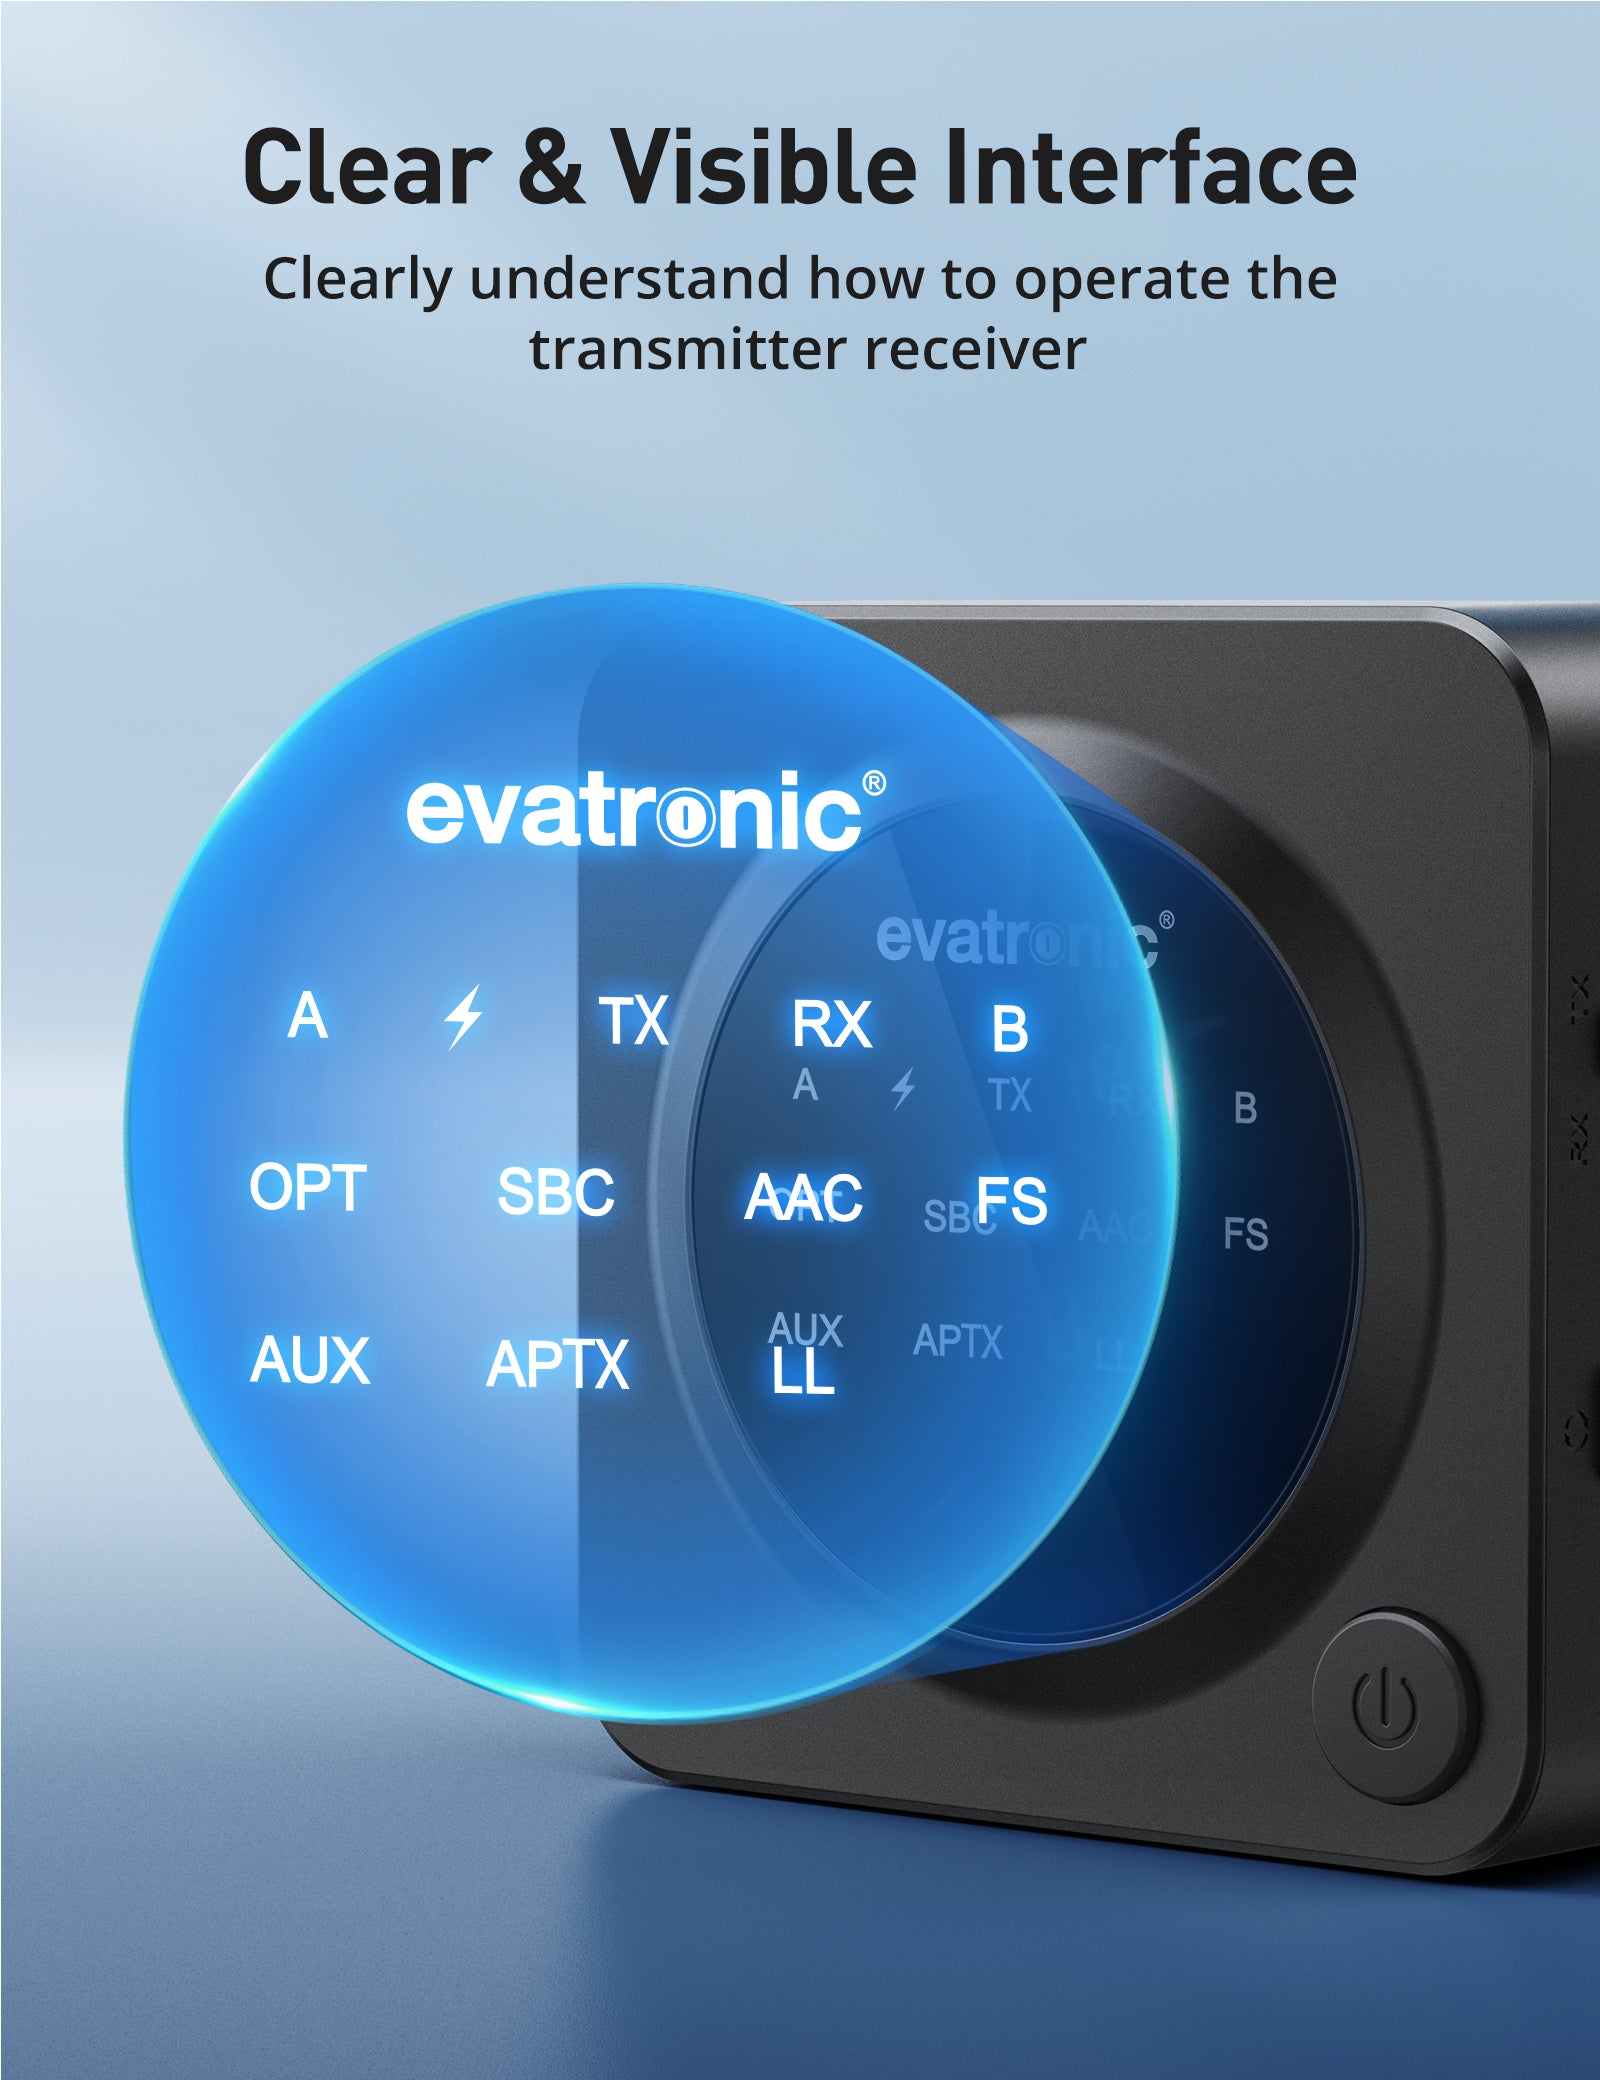 Evatronic BA007 Bluetooth 5.0 Transmitter Receiver for TV/PC